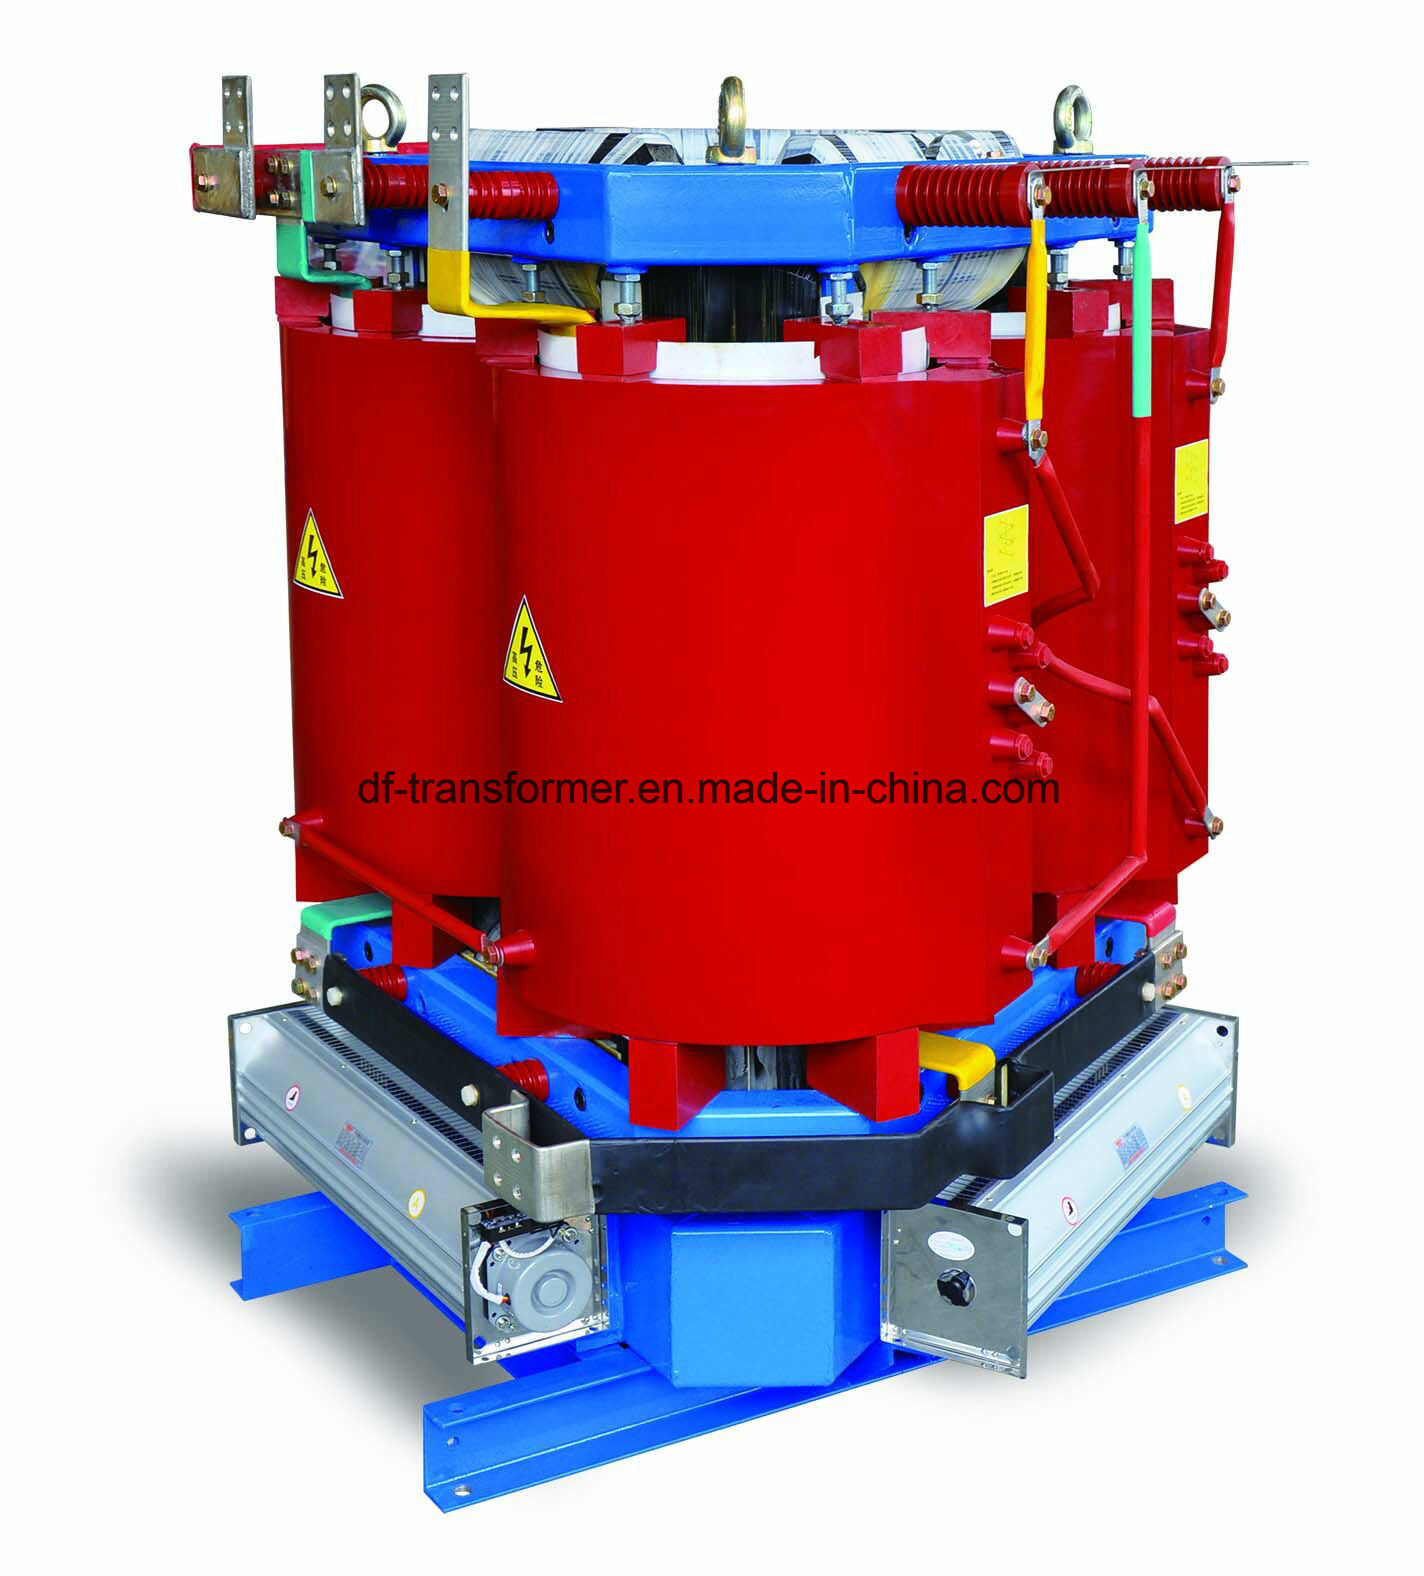 6~35kv Cast Resin Dry Type Indoor Power Transformer with Enclosure